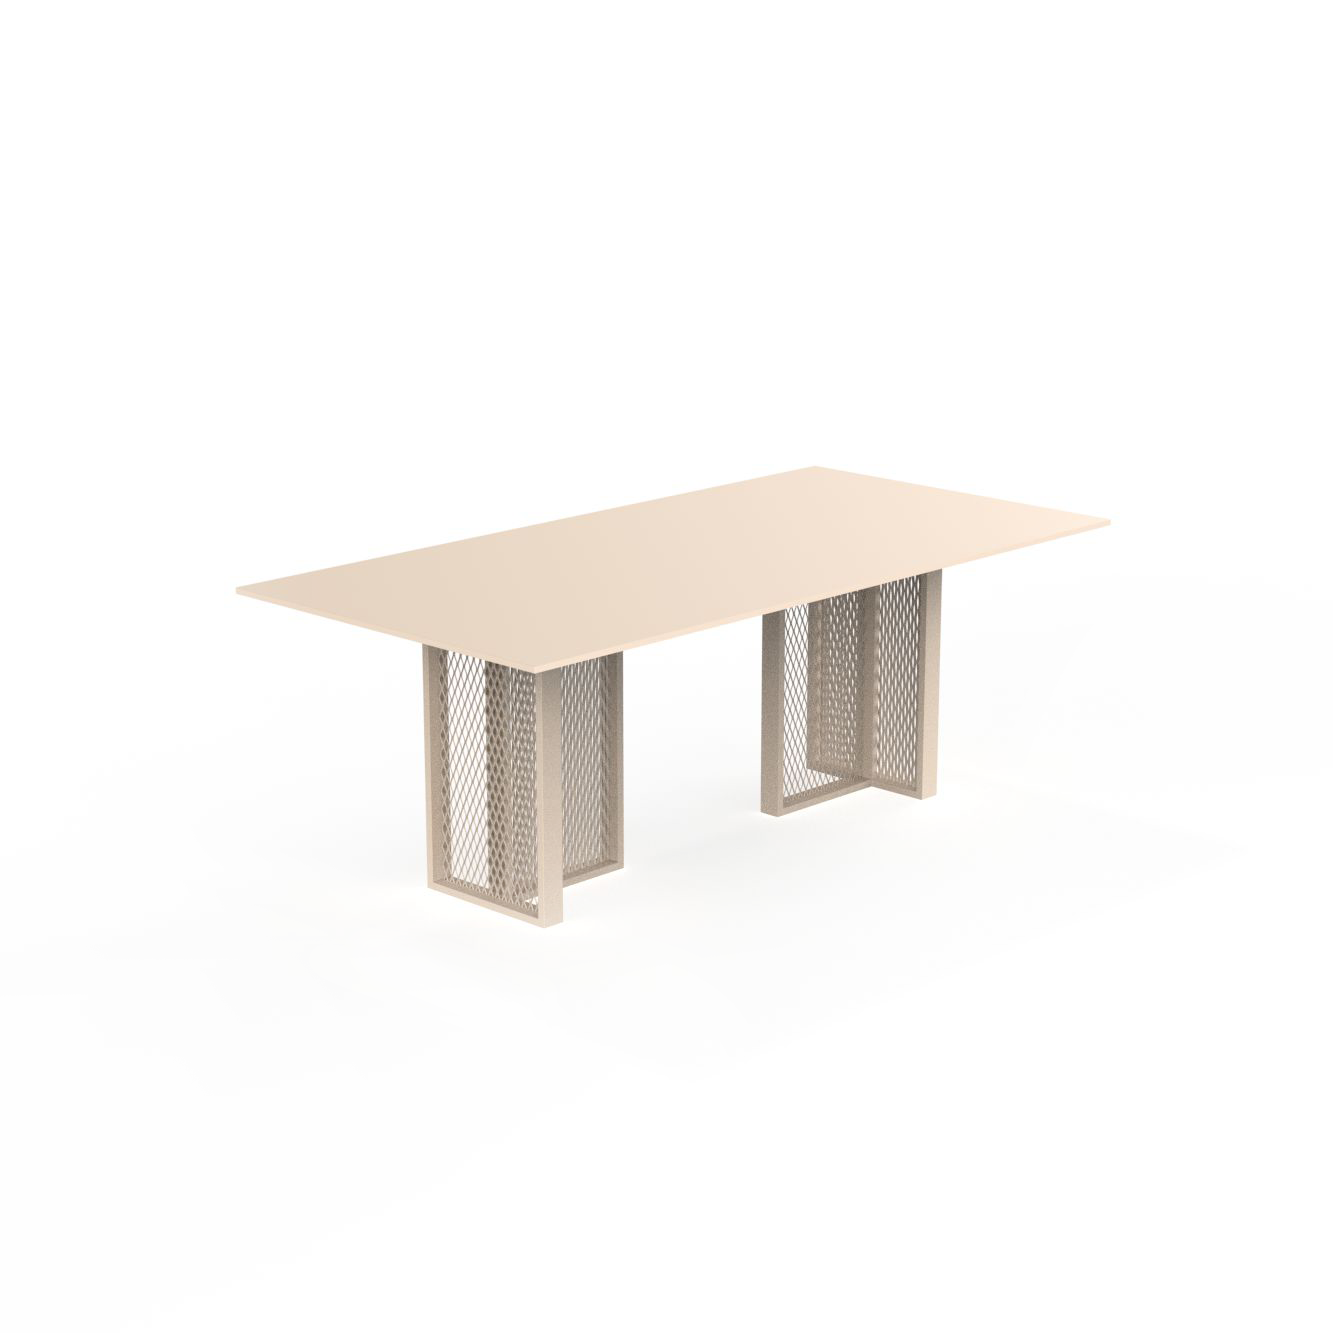 THE FACTORY DINING TABLE 250x120